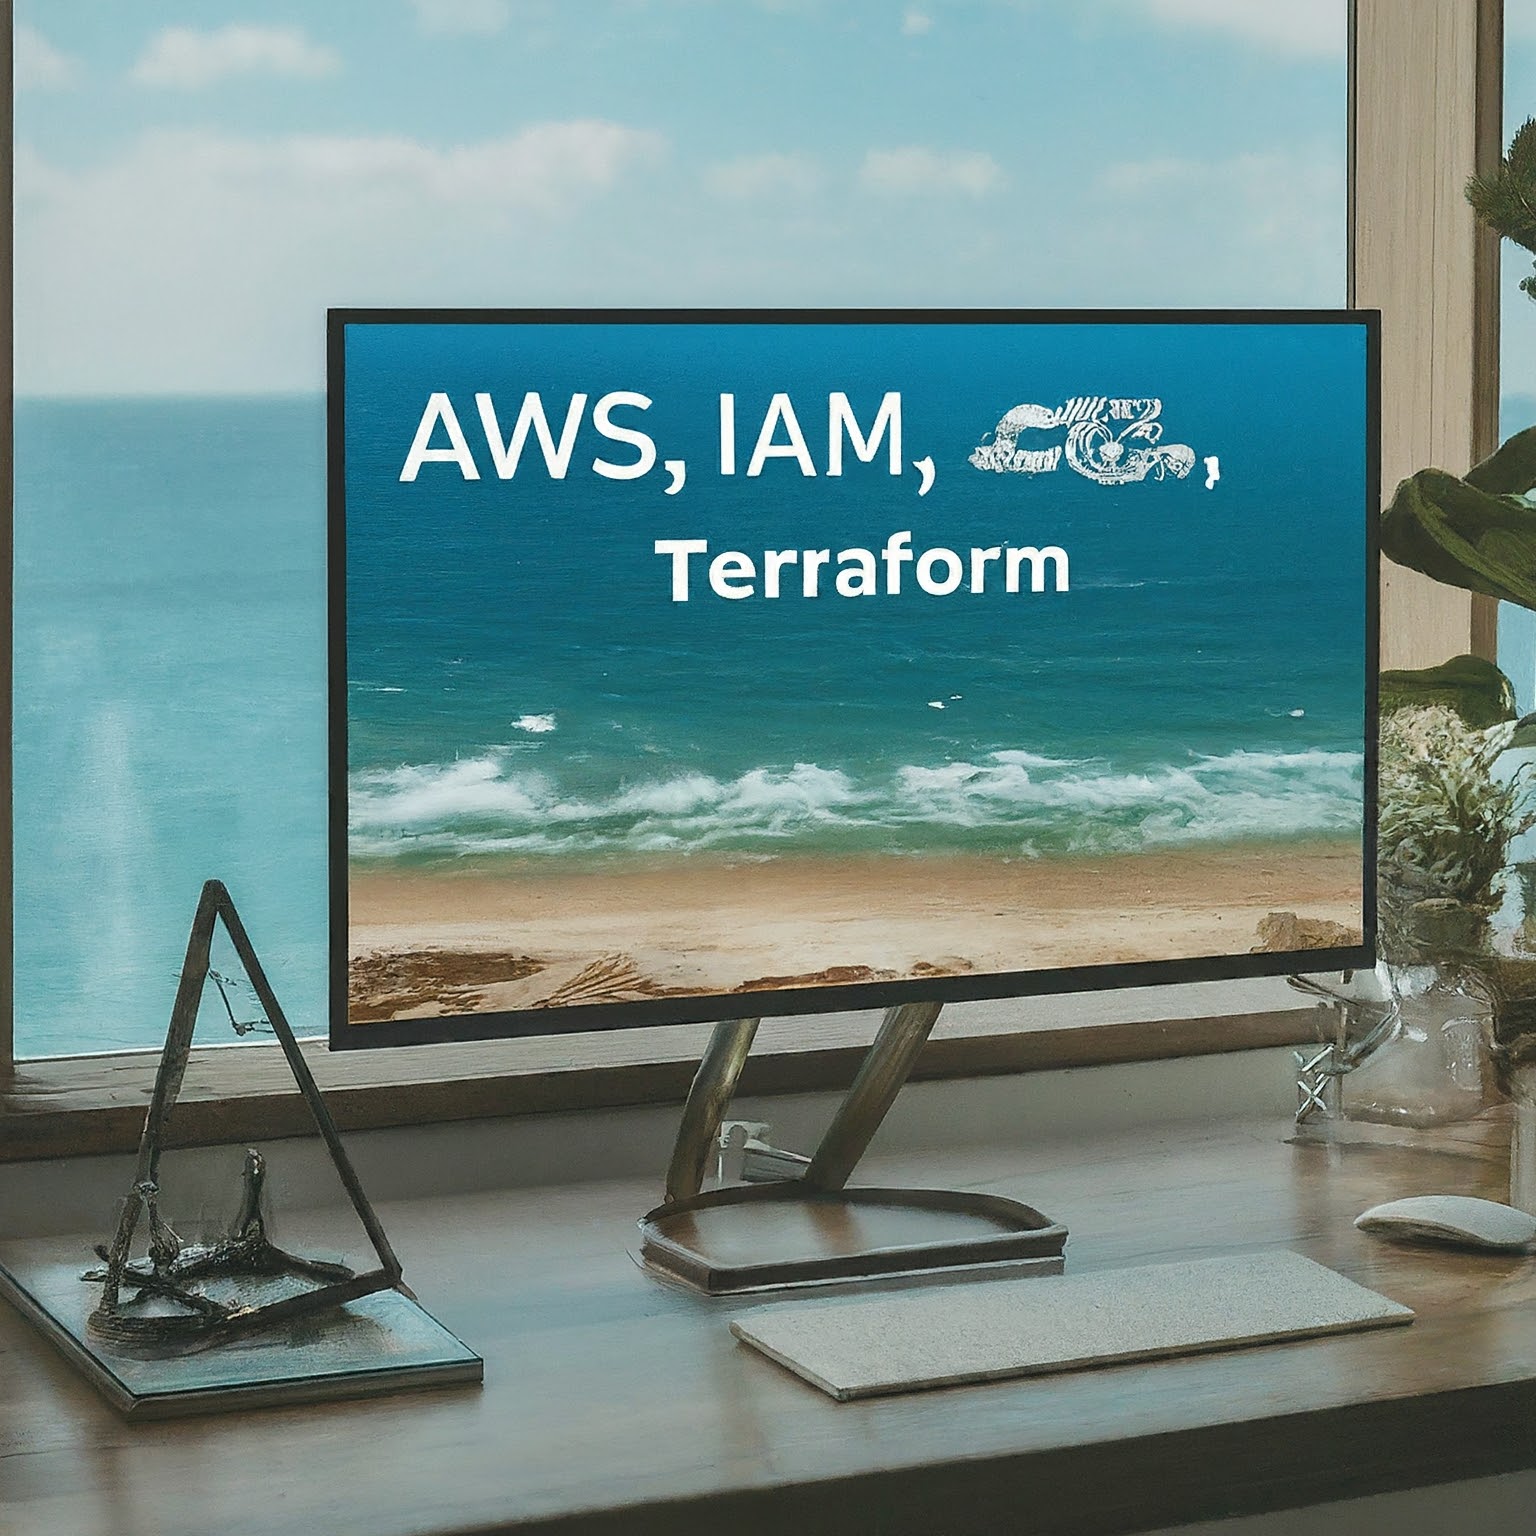 Developer Read-Only AWS IAM Group on AWS Cloud with Terraform